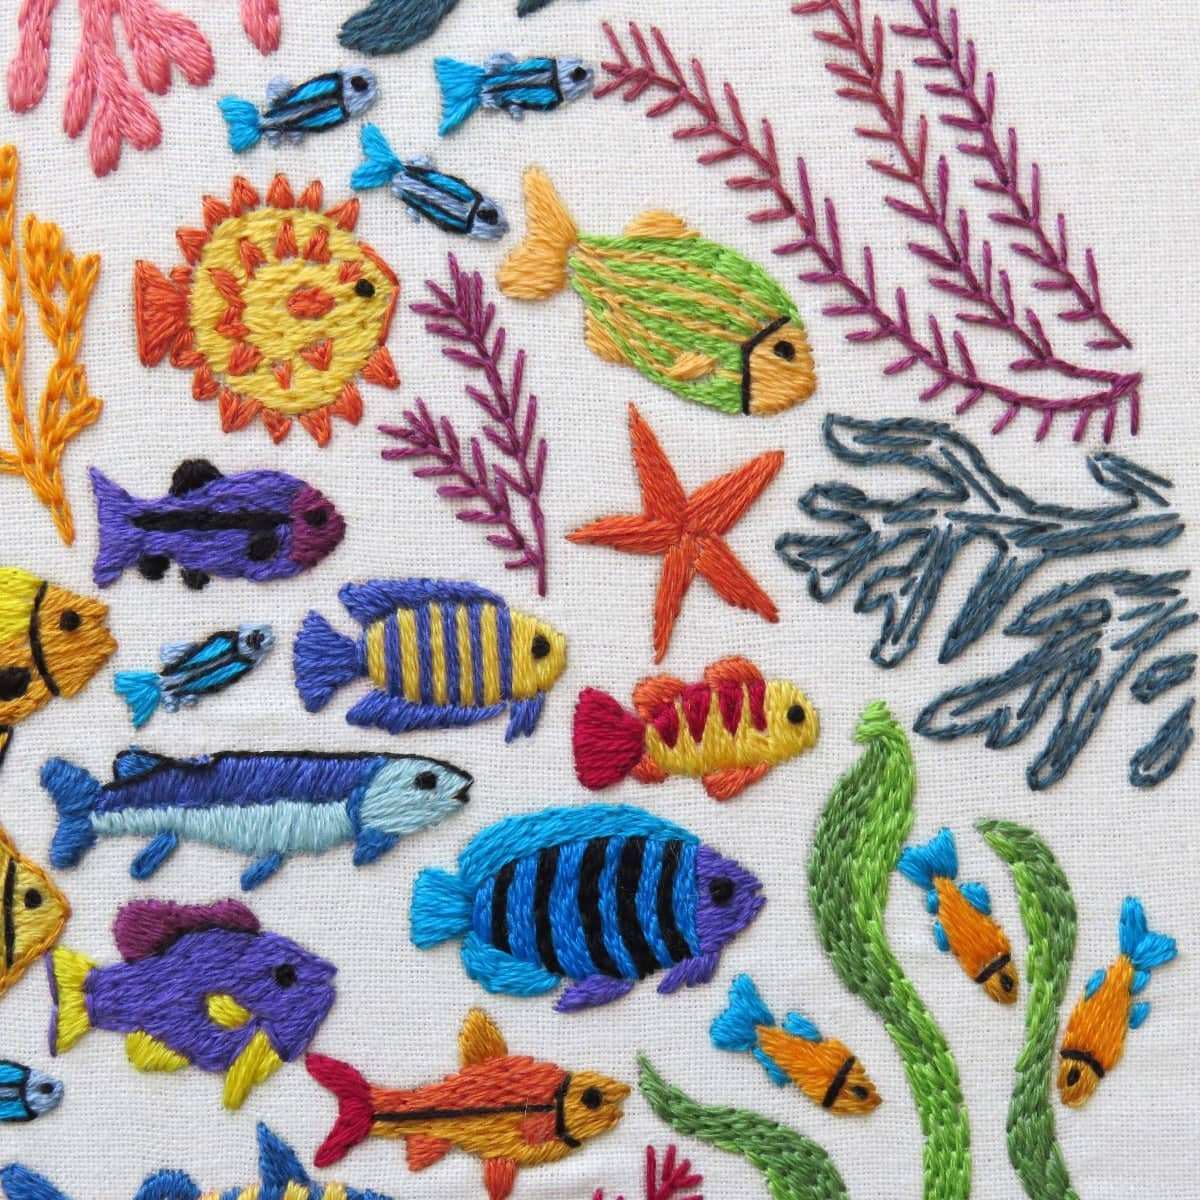 Ocean Wonders, Hand Embroidery Pattern , PDF Download , StitchDoodles , embroidery hoop kit, embroidery kit for adults, embroidery kit for beginers, hand embroidery, PDF pattern , StitchDoodles , shop.stitchdoodles.com